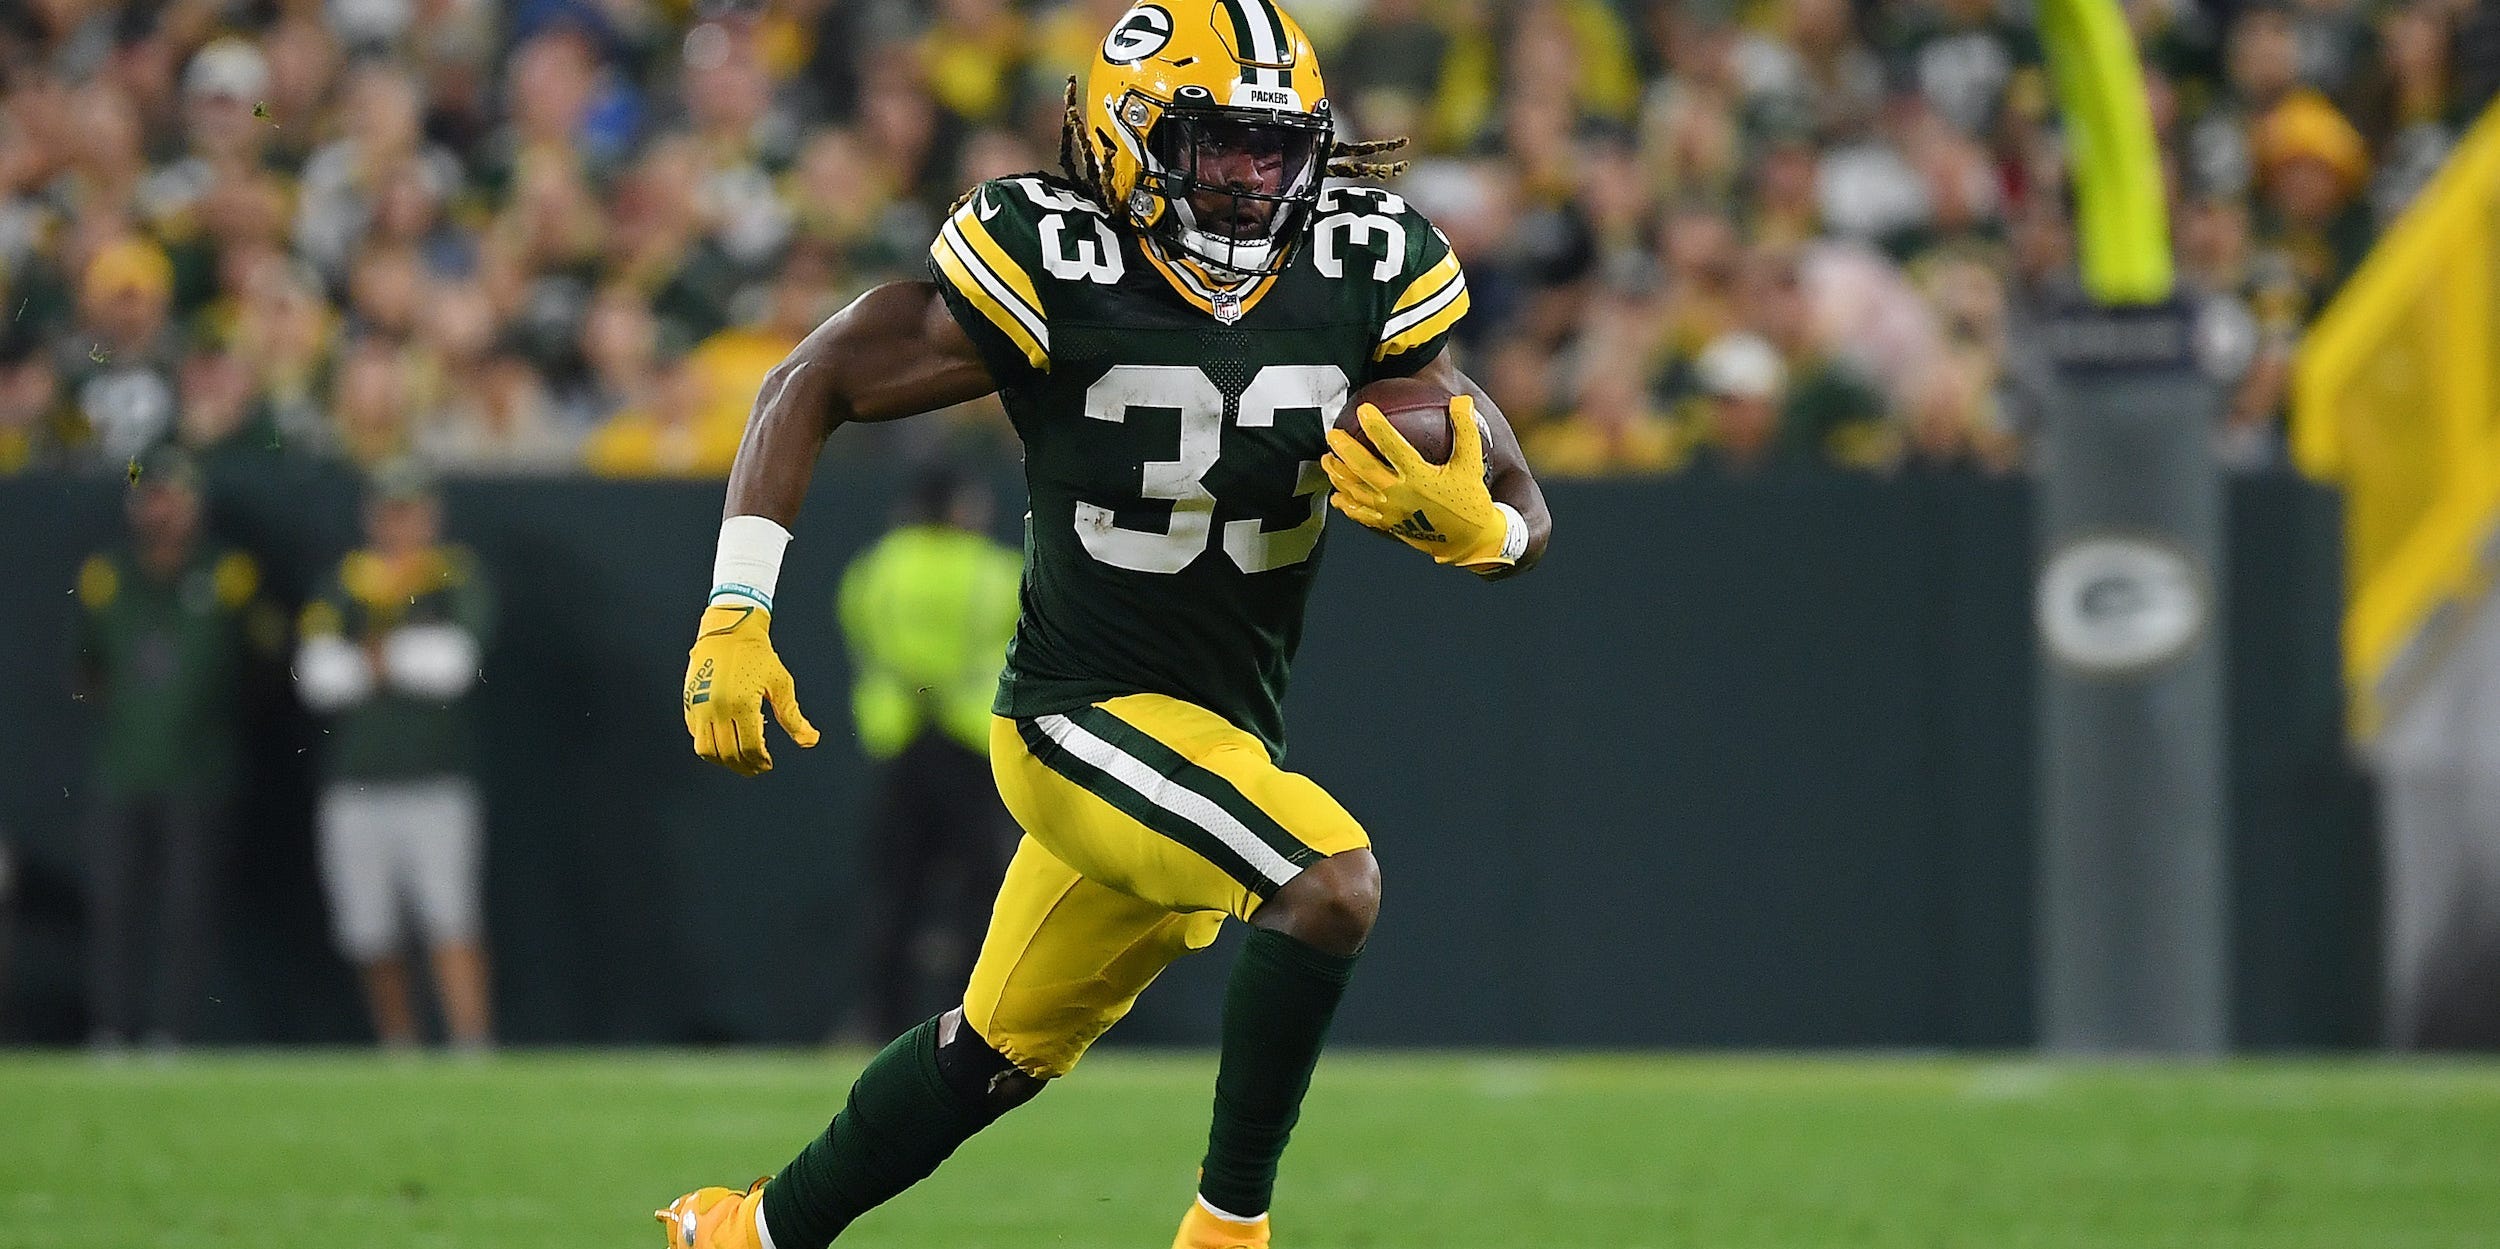 Aaron Jones of the Green Bay Packers plays against the Detroit Lions.